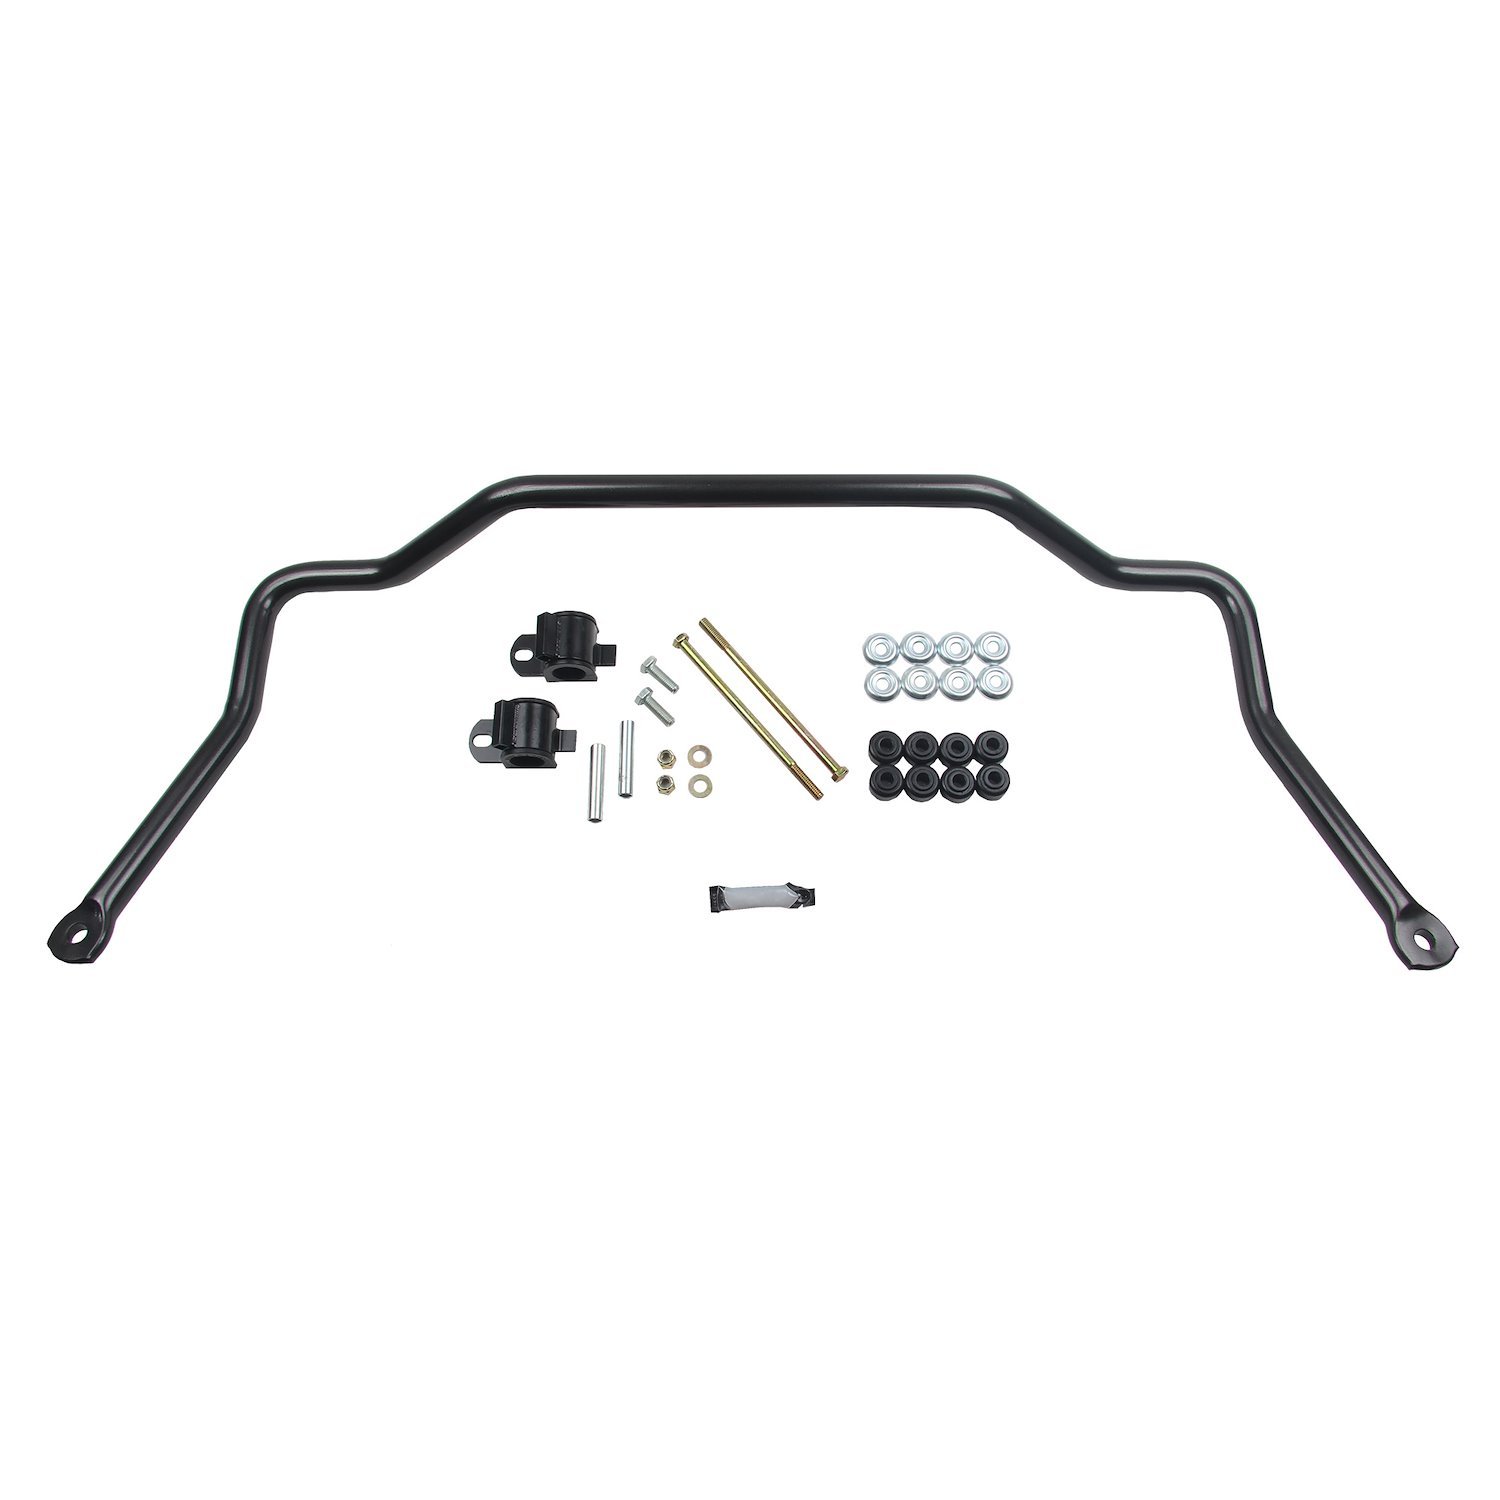 50015 Anti-Swaybar - Front for 75-81 BMW E12, E24